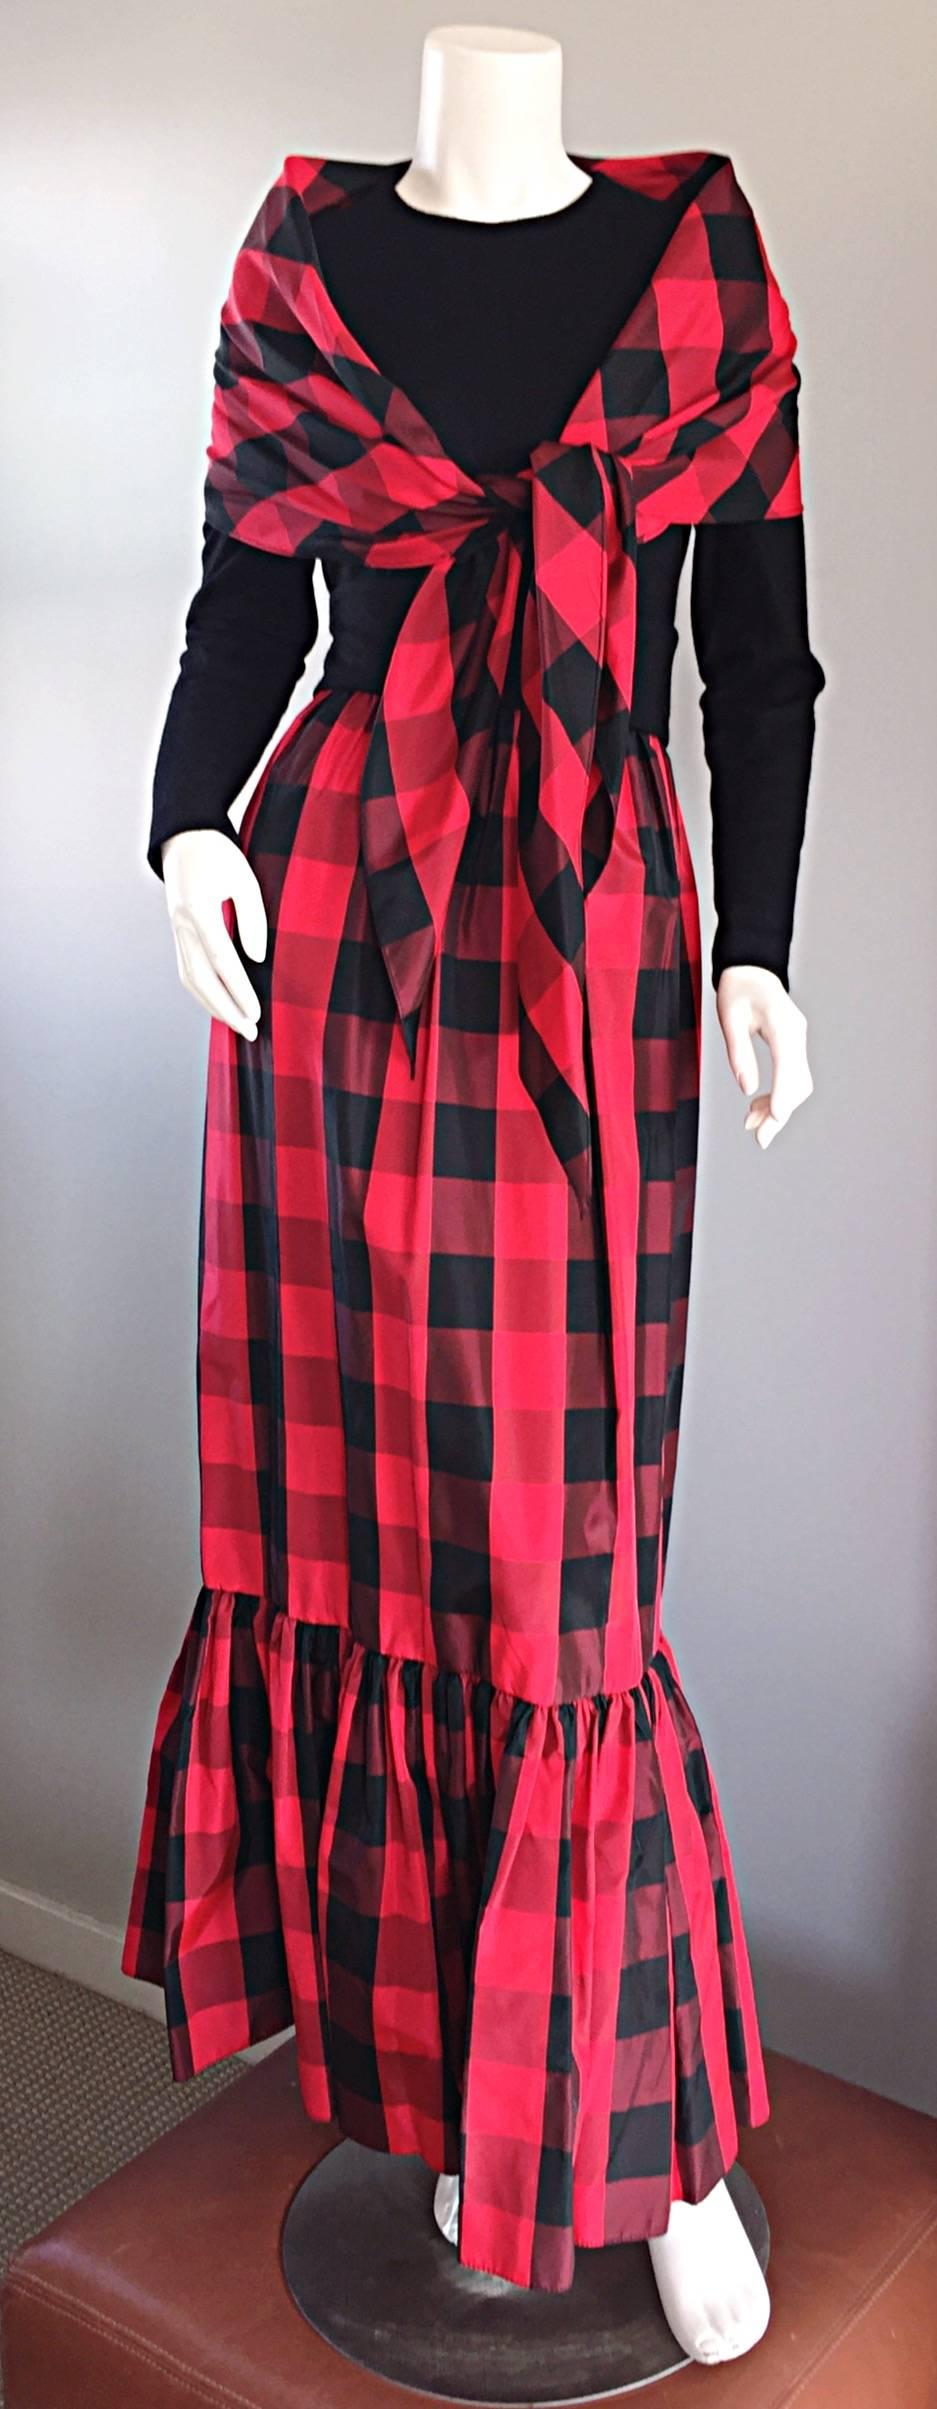 Such a chic vintage early 1970s ANNE FOGARTY black and red checkered dress, with matching shawl! Skirt features oversized gingham print on a silk taffeta, with a pleated flared hem. Sleek long black sleeves. Wonderful fit, that flatters the curves.